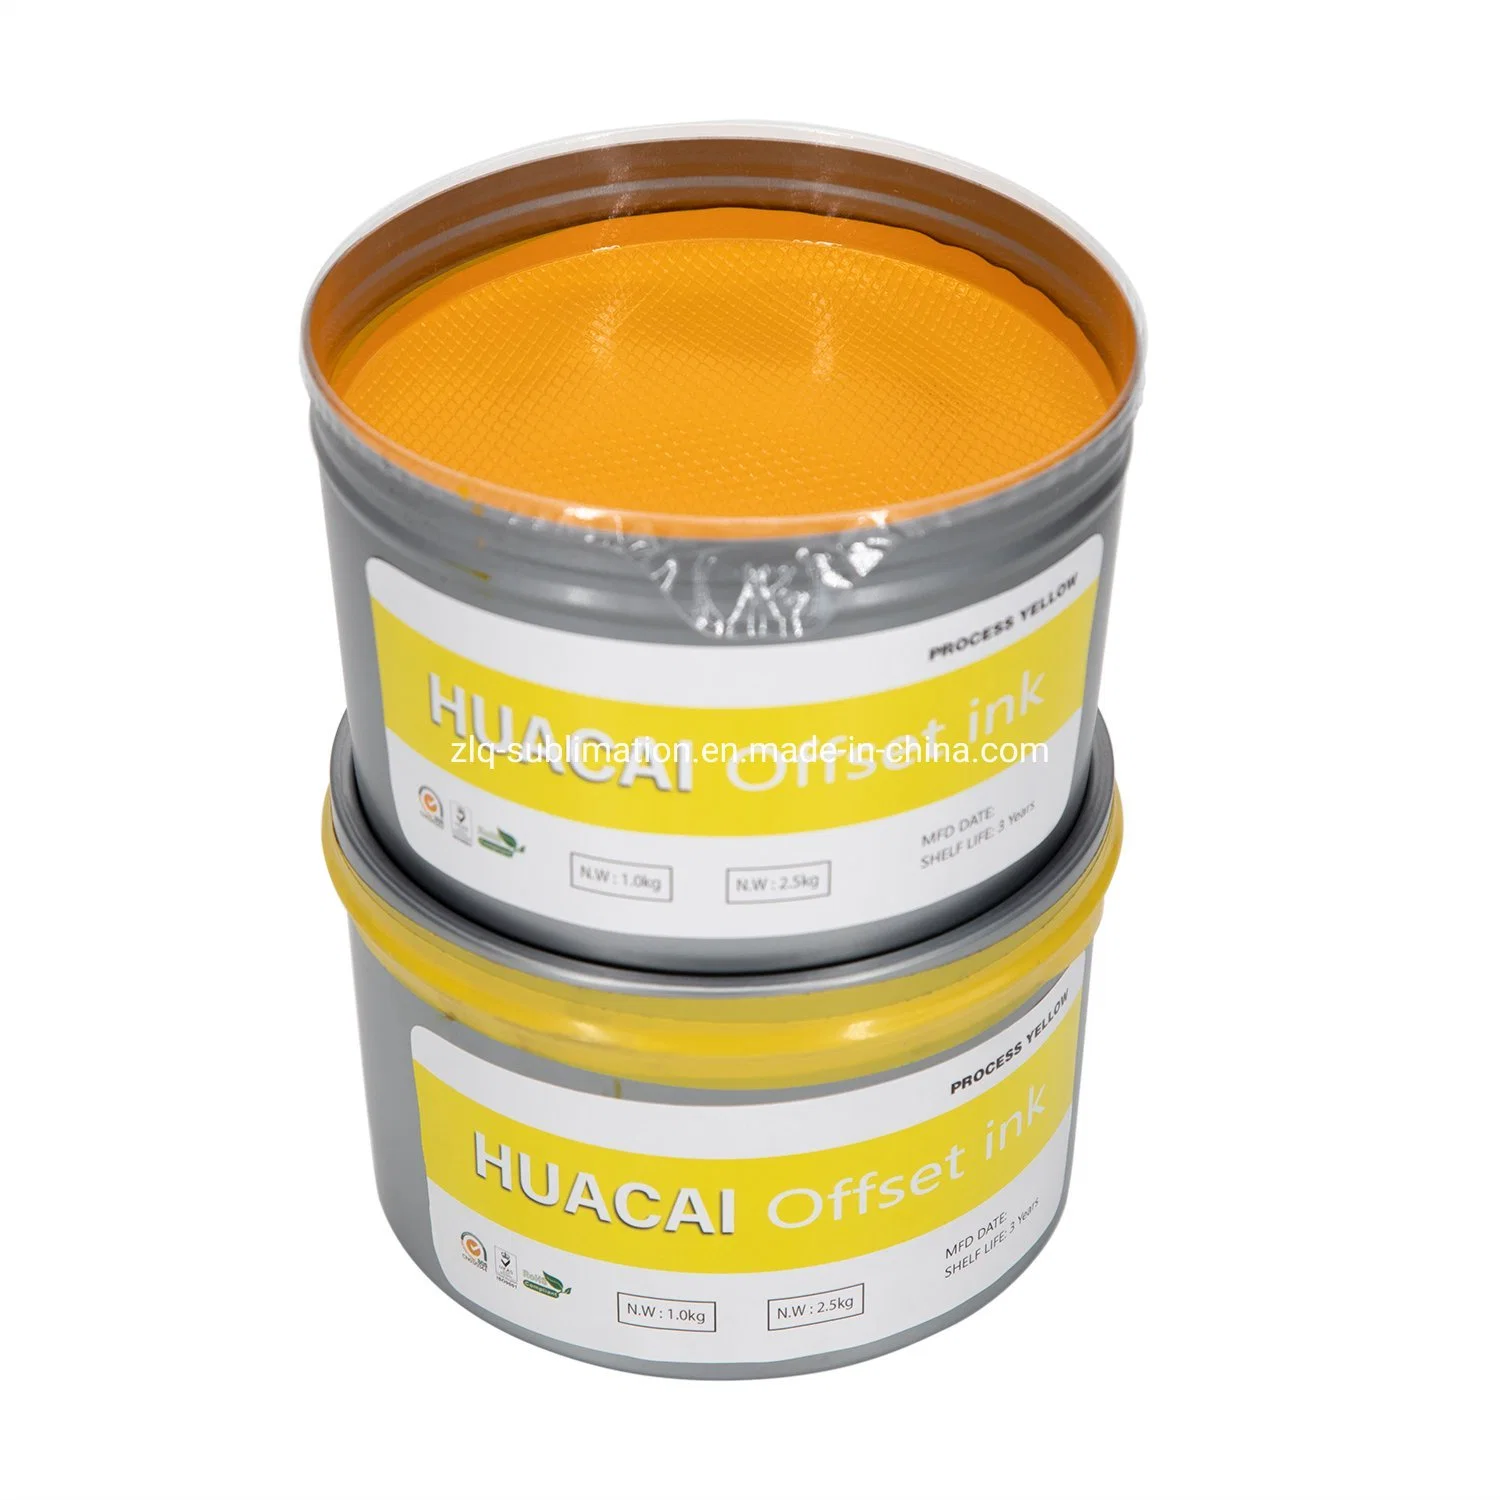 Sheet Fed Offset Printing Ink About Paper Printing Offset Ink